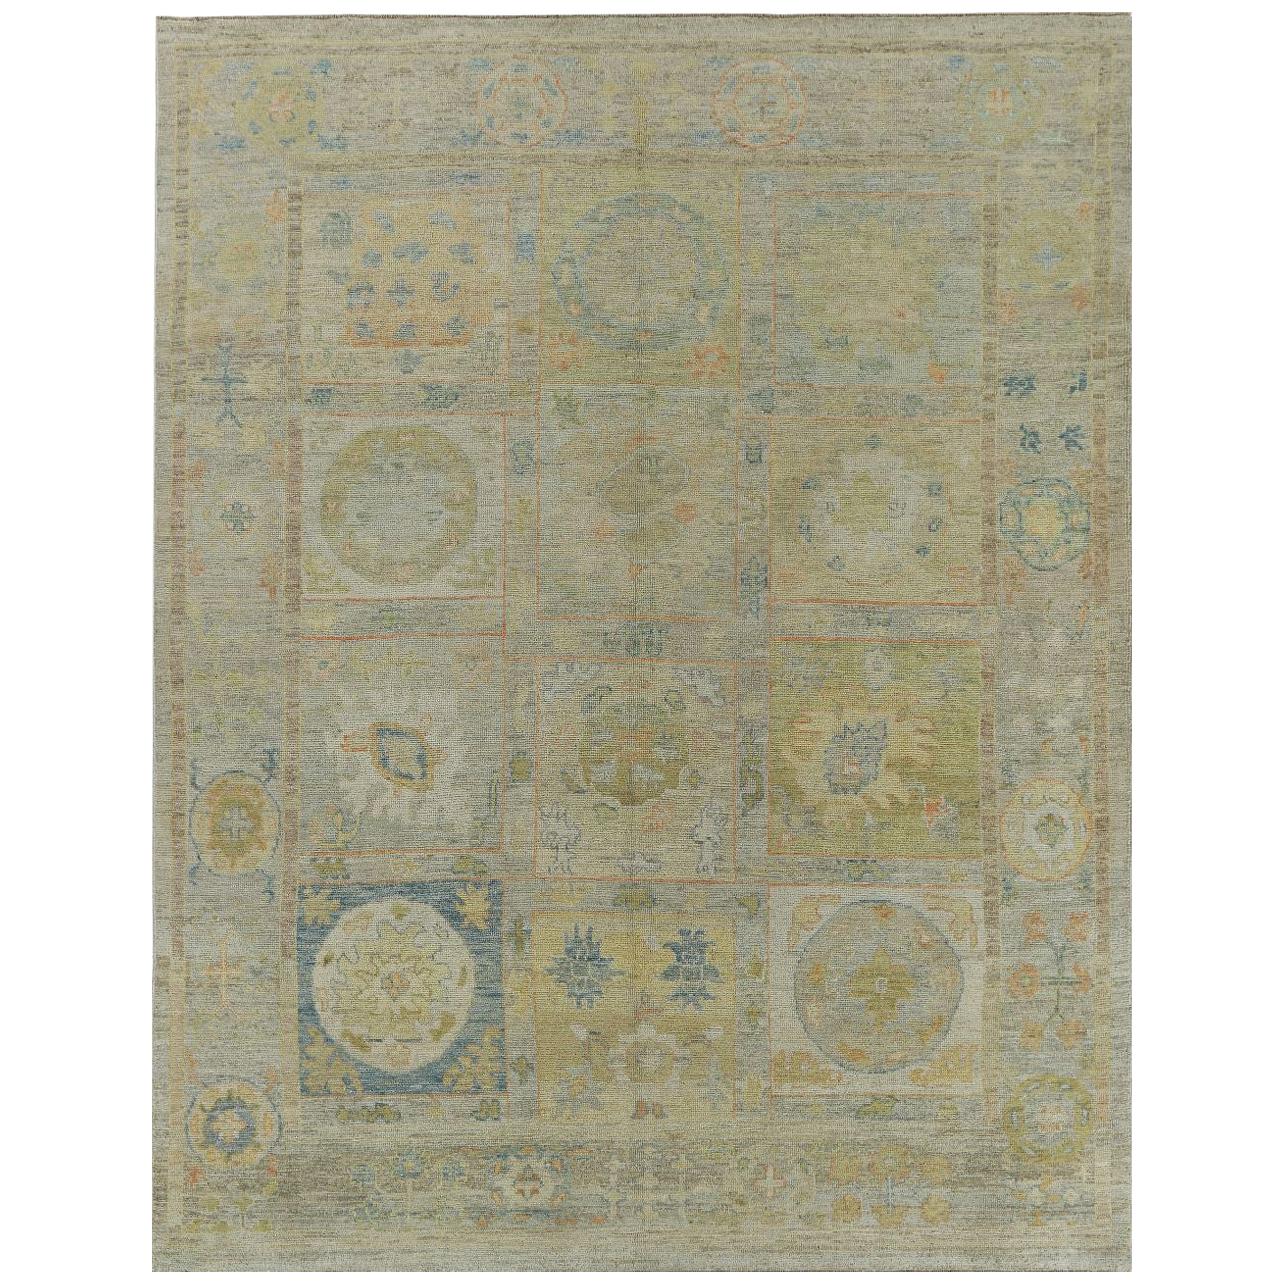 Nazmiyal Collection Modern Turkish Oushak. 10 ft. 7 in x 13 ft. 6 in